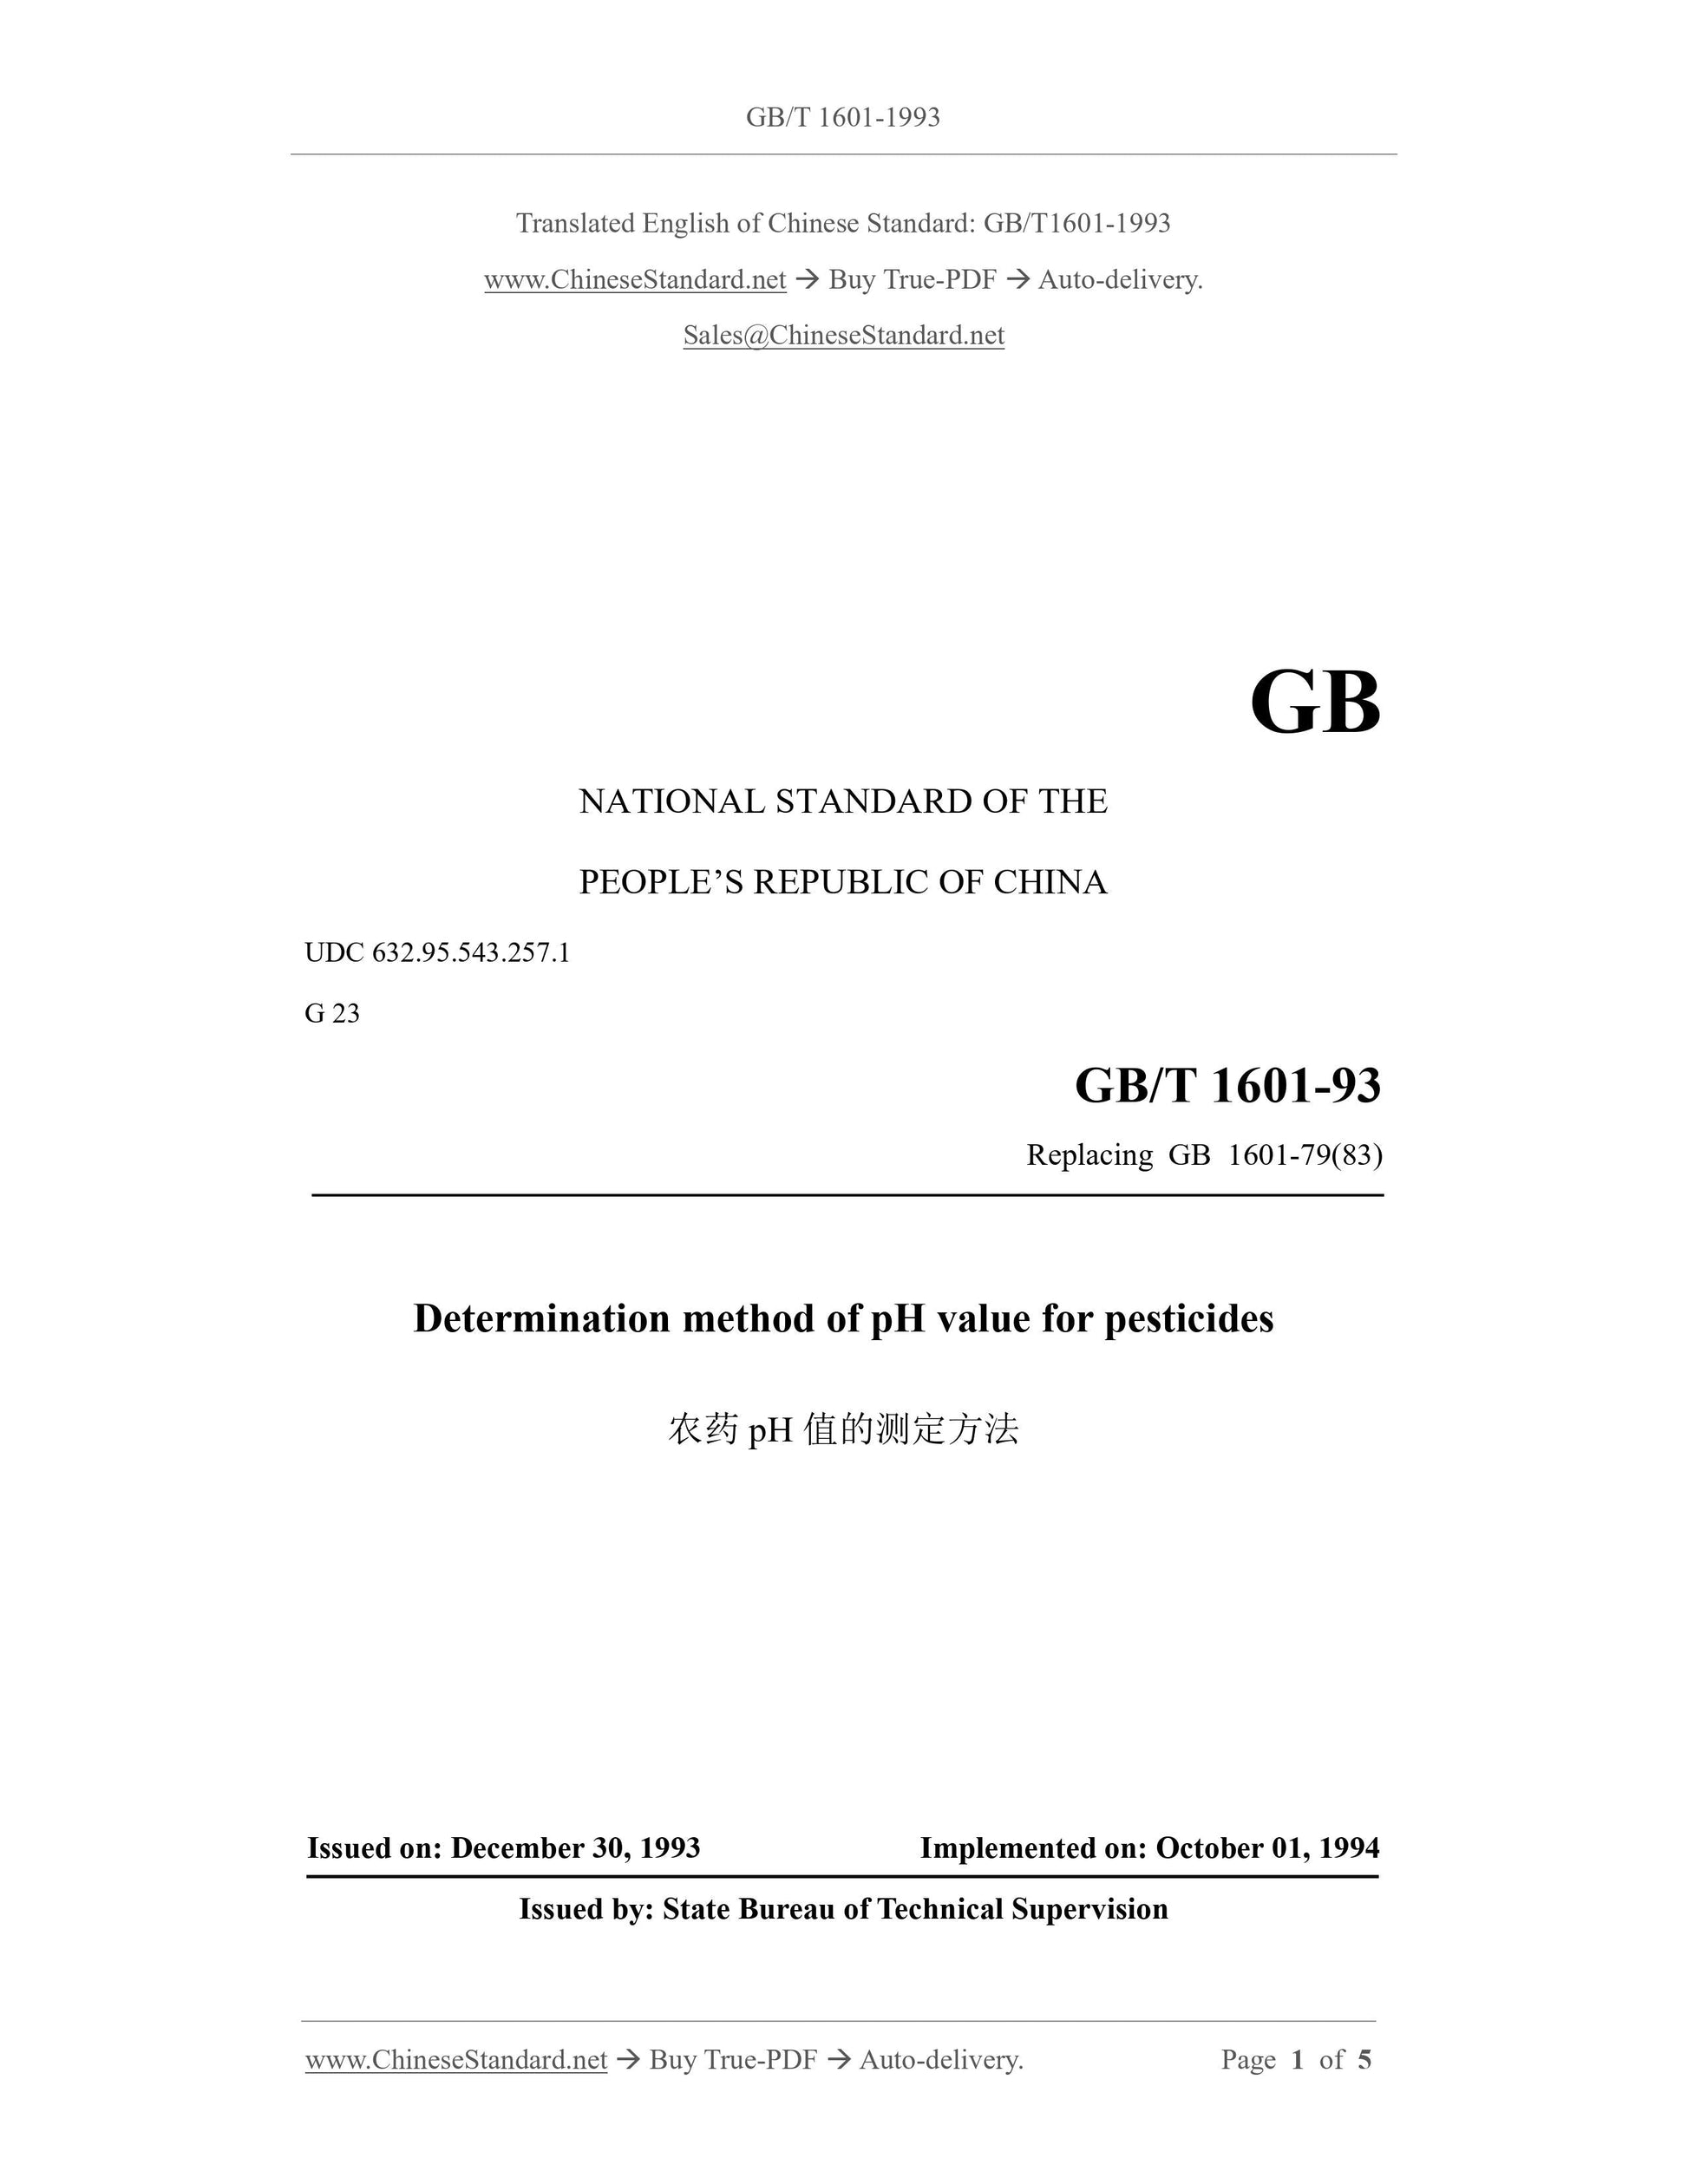 GB/T 1601-1993 Page 1